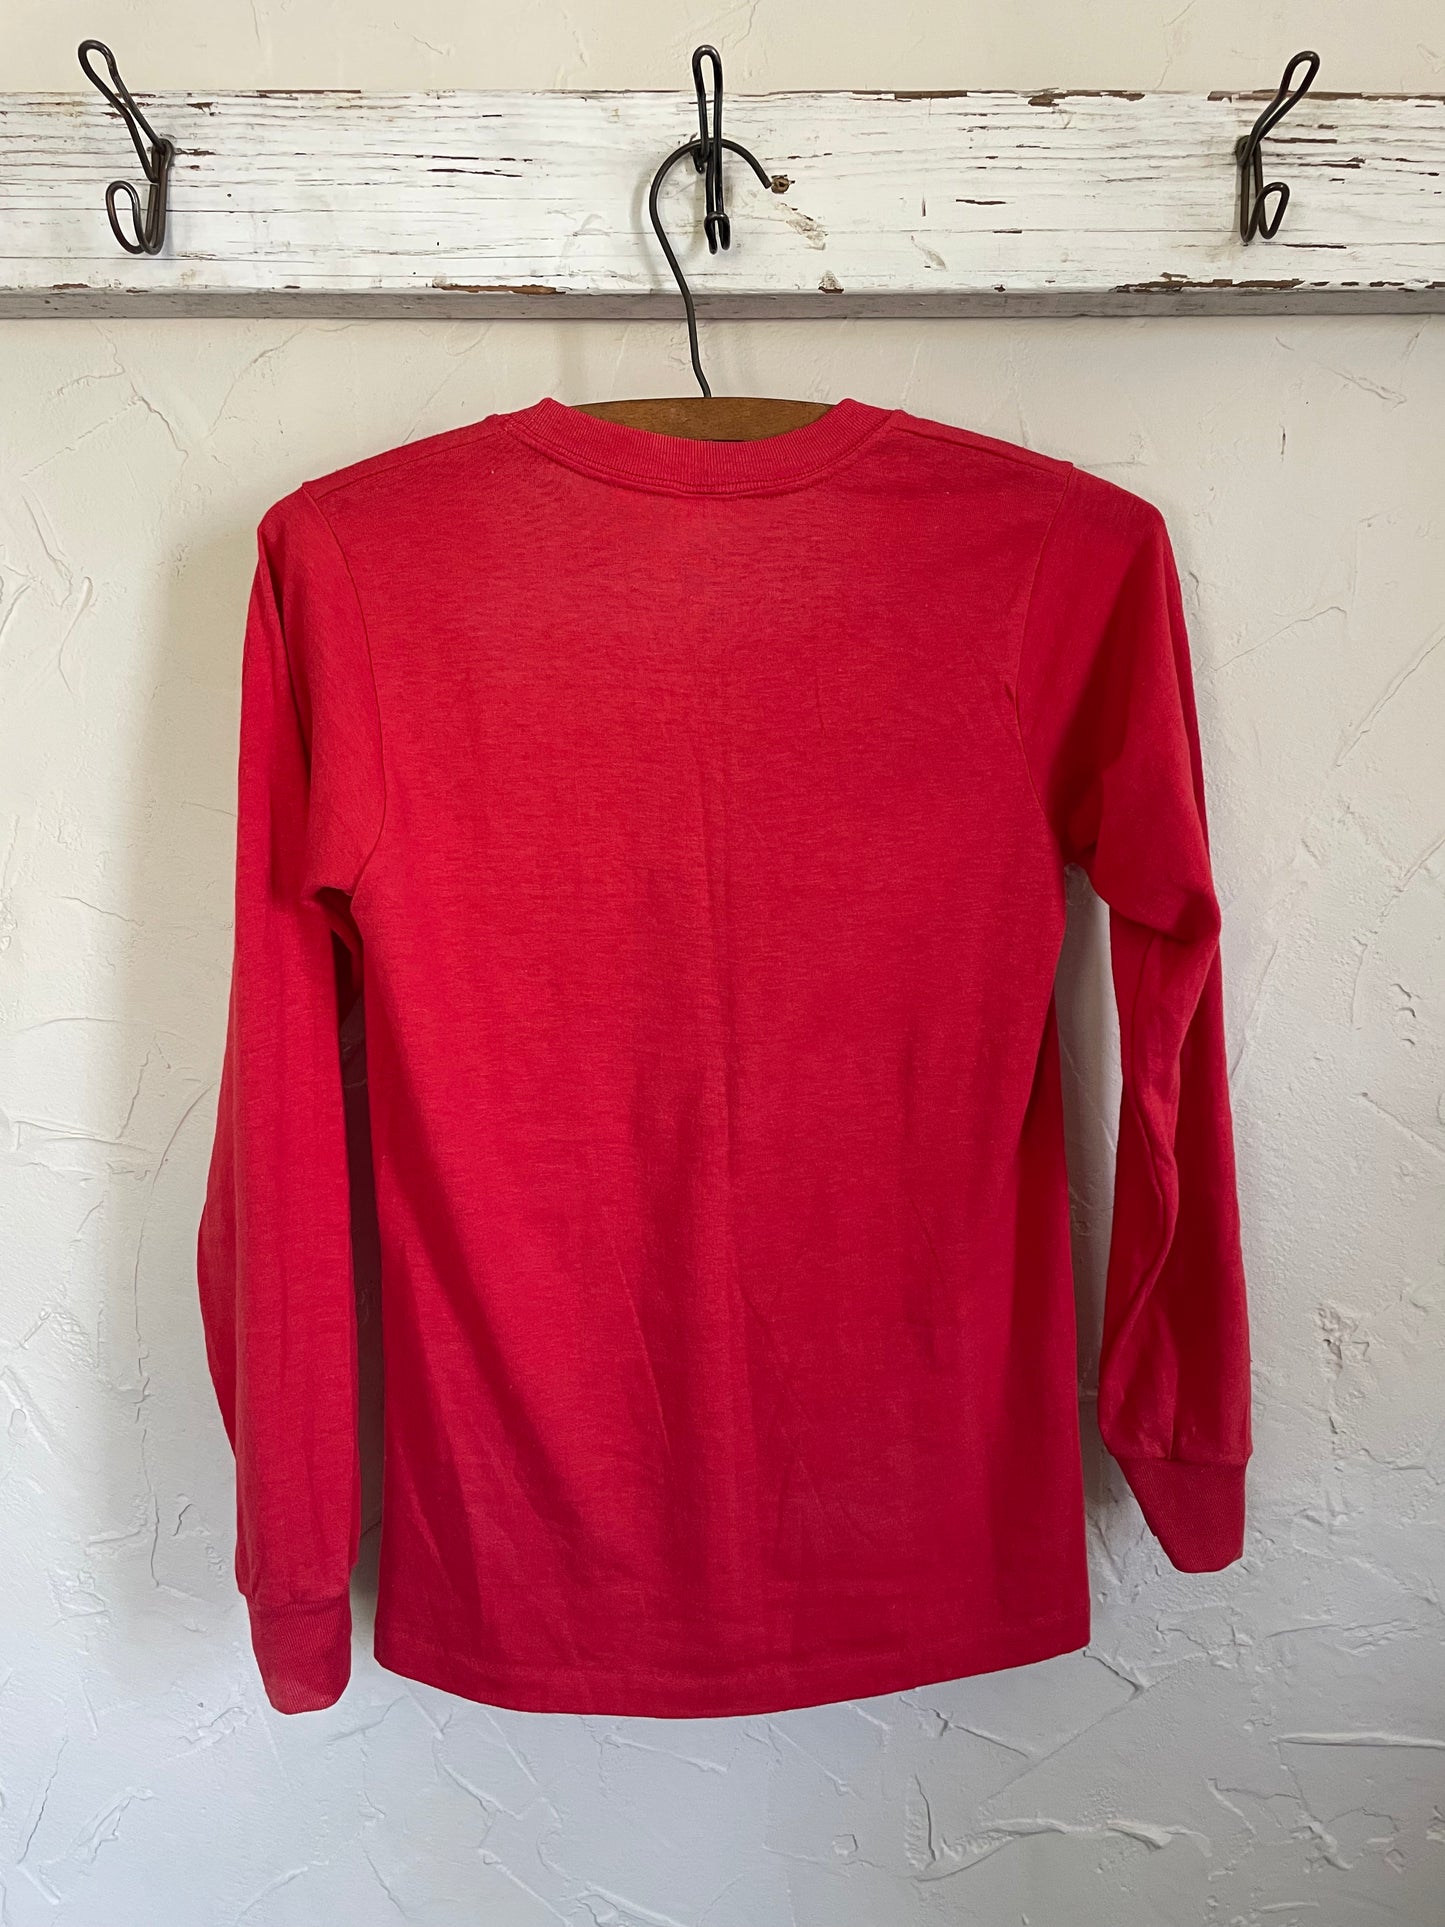 70s/80s Blank Red Long Sleeve Shirt